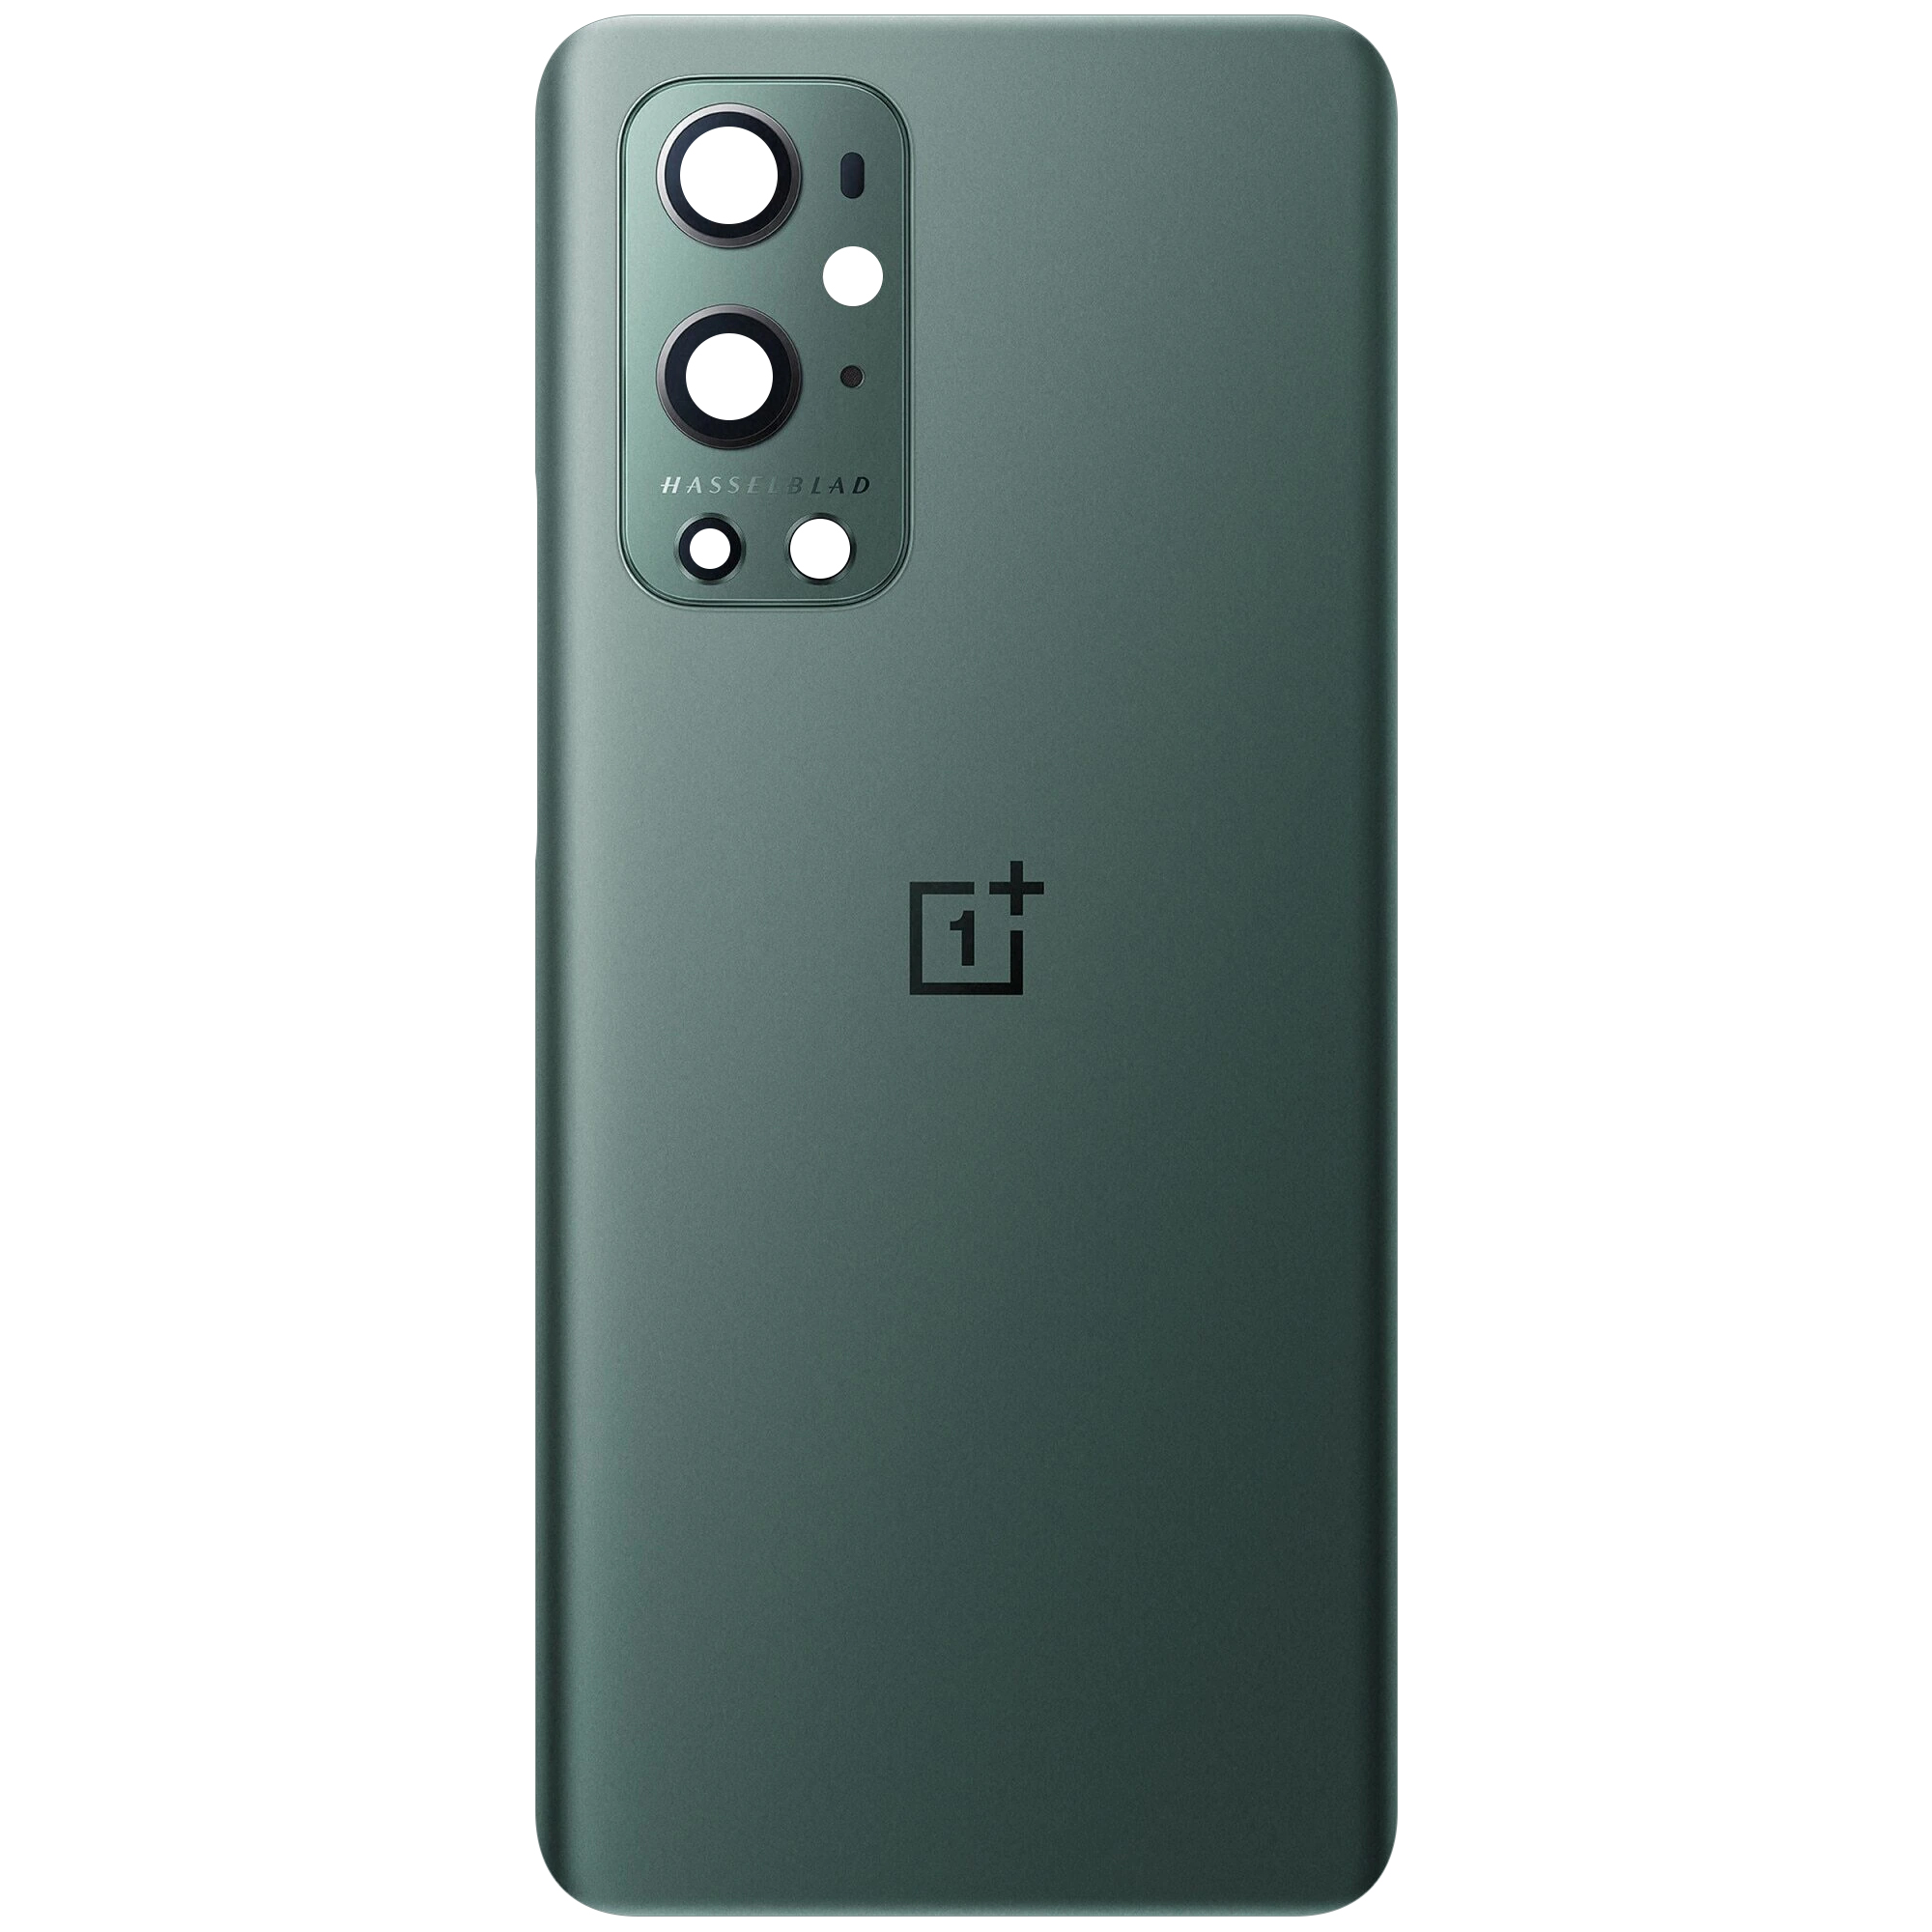 Capac Baterie OnePlus 9 Pro, Verde (Forest Green), Service Pack 4906513 